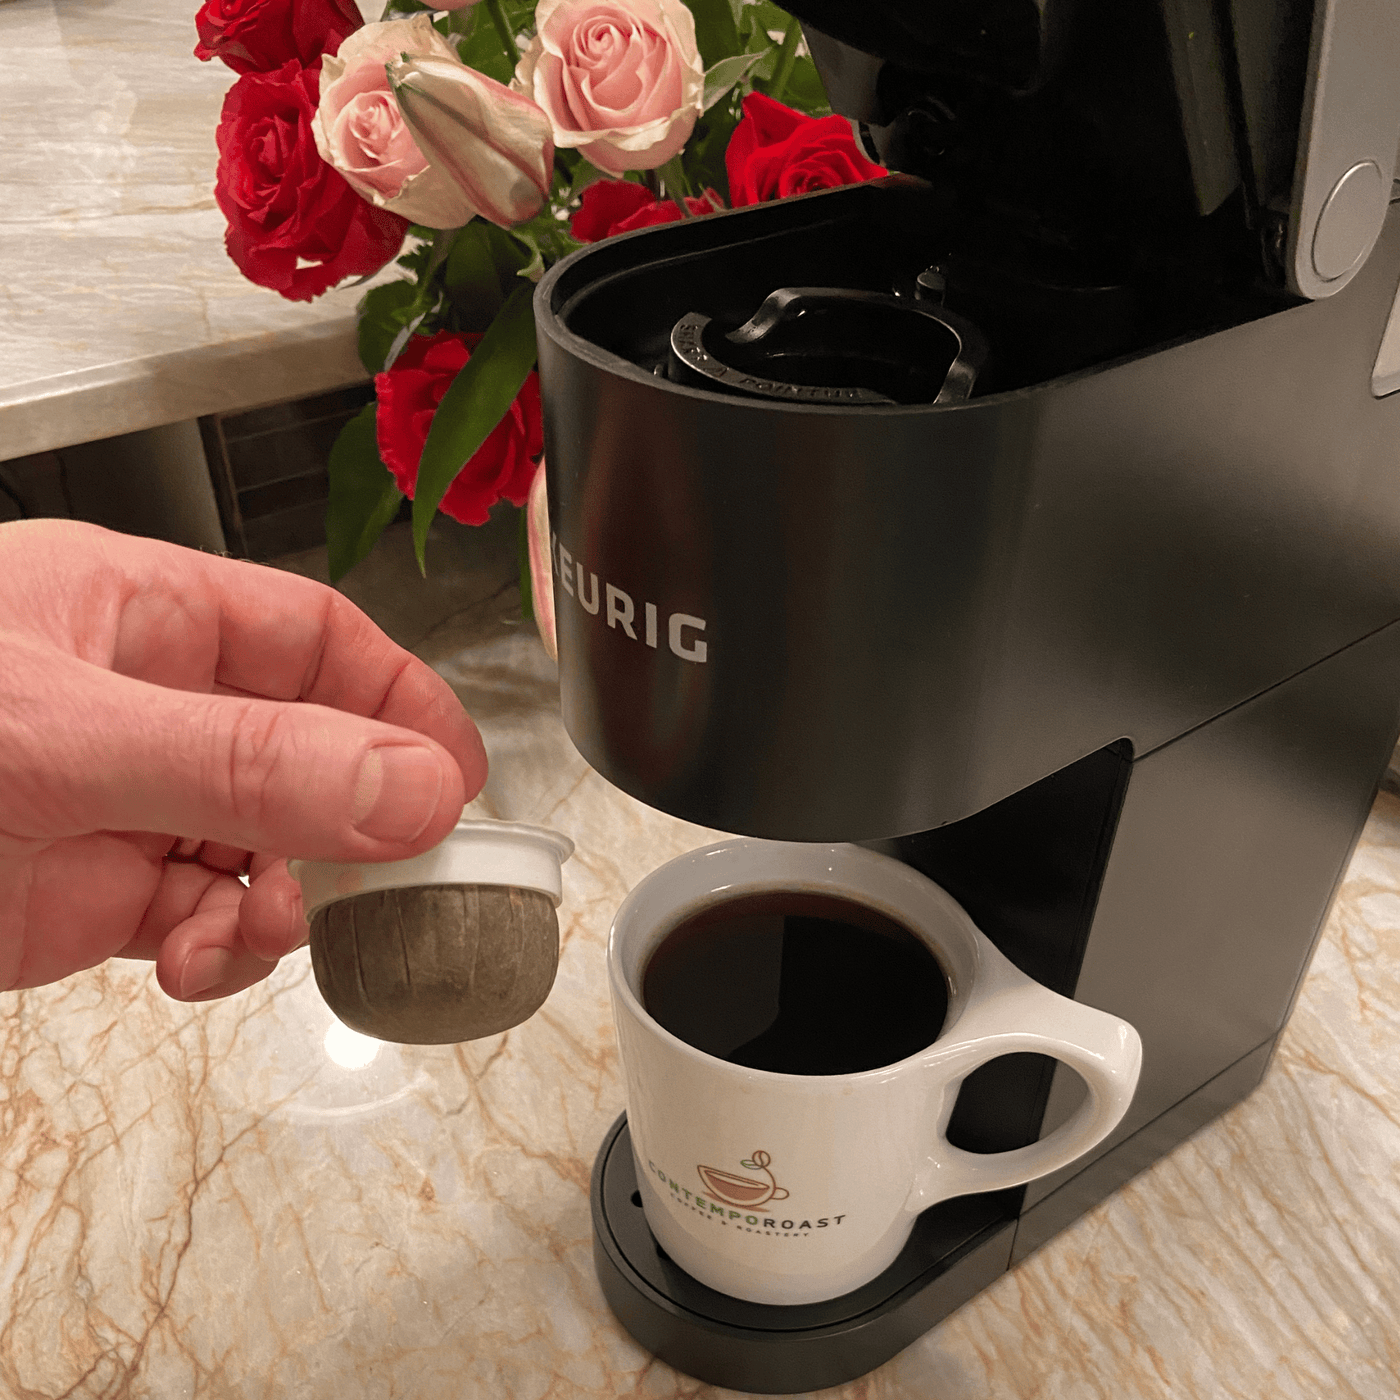 coffee pod with Keurig brewer